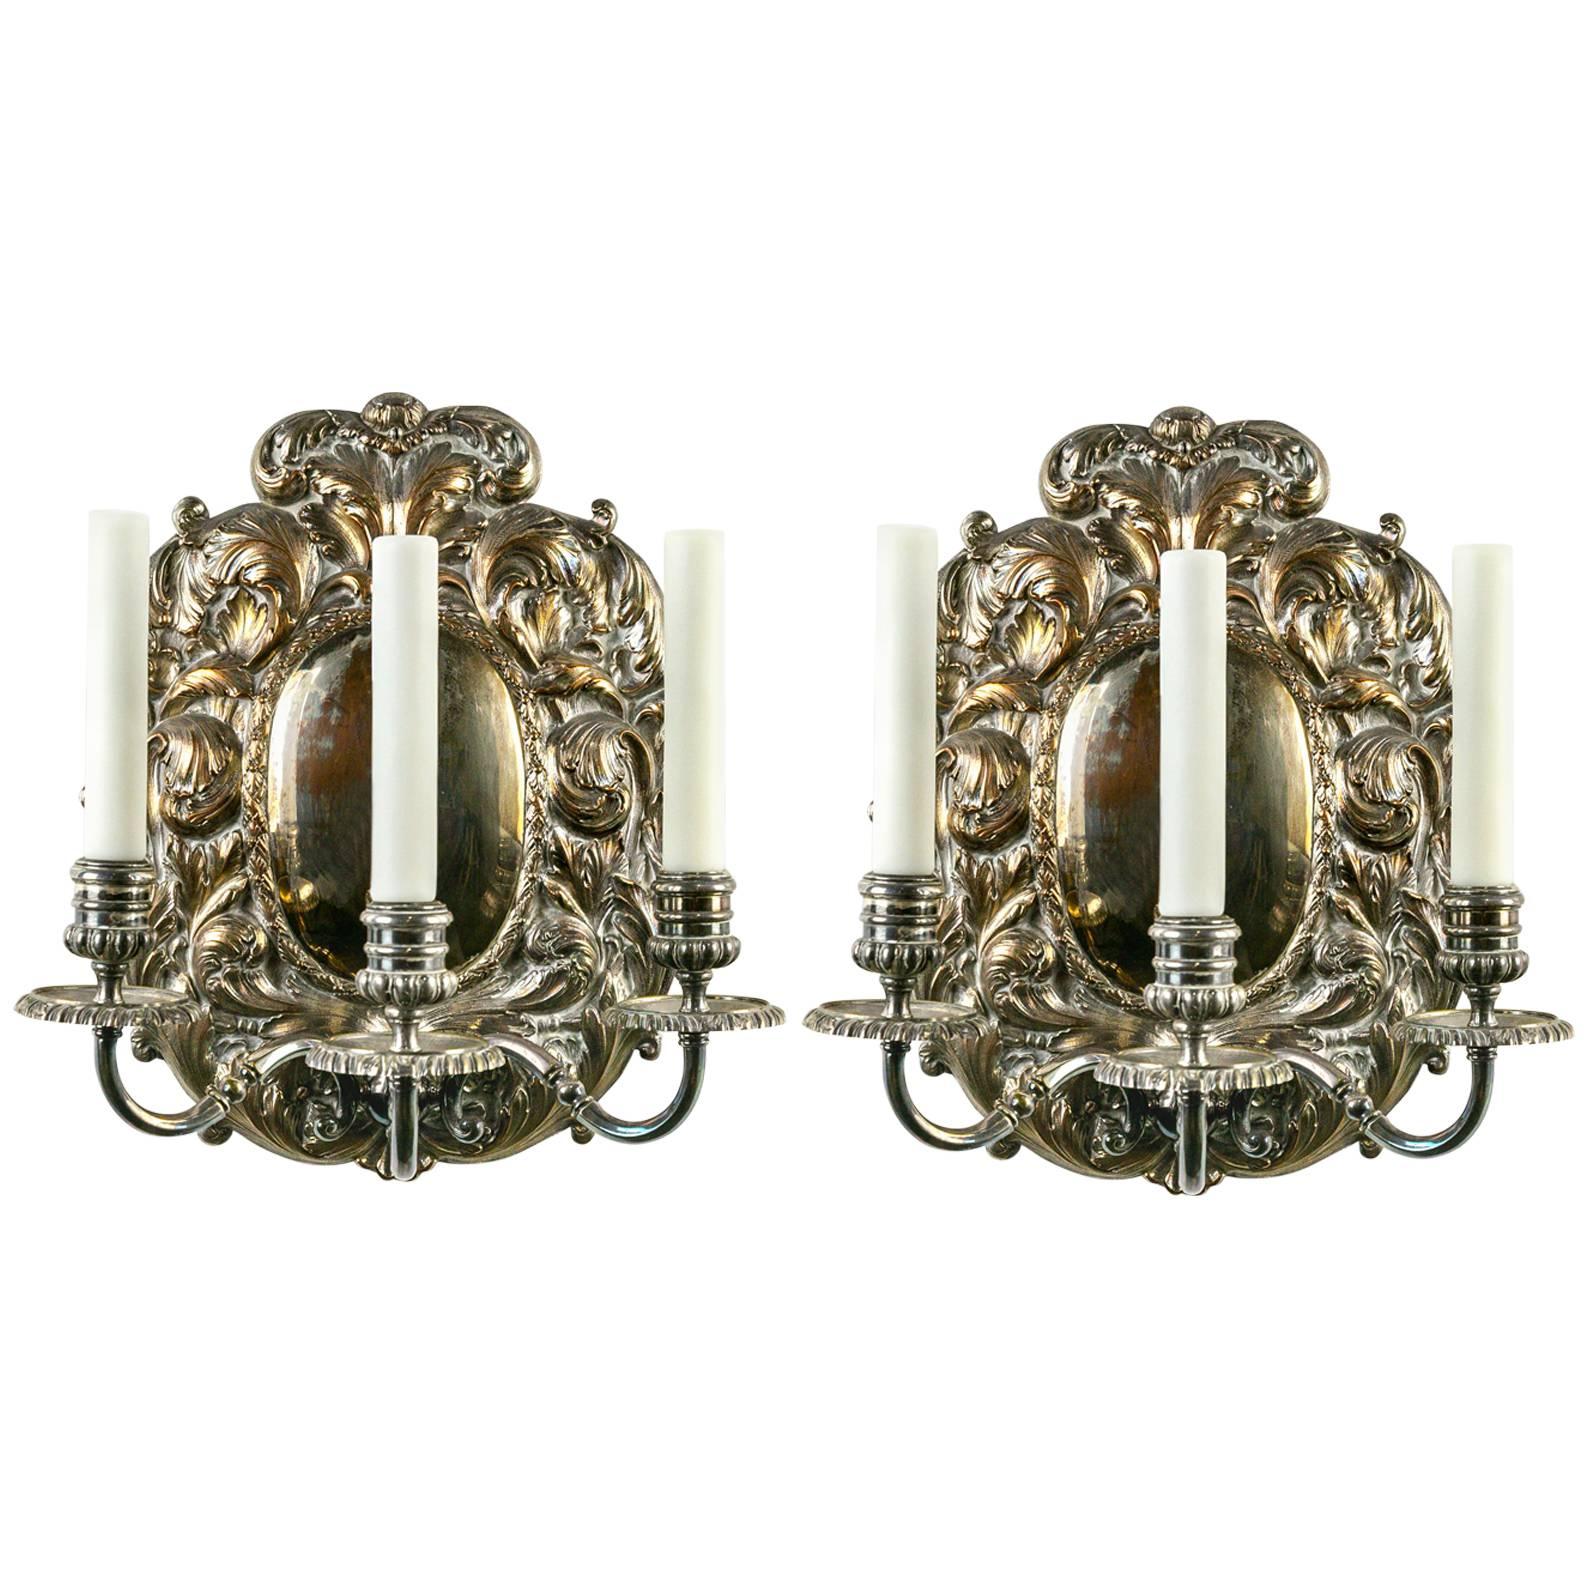 Pair of Spanish Silver Shield Triple Candelabra Sconces (3 pairs available)